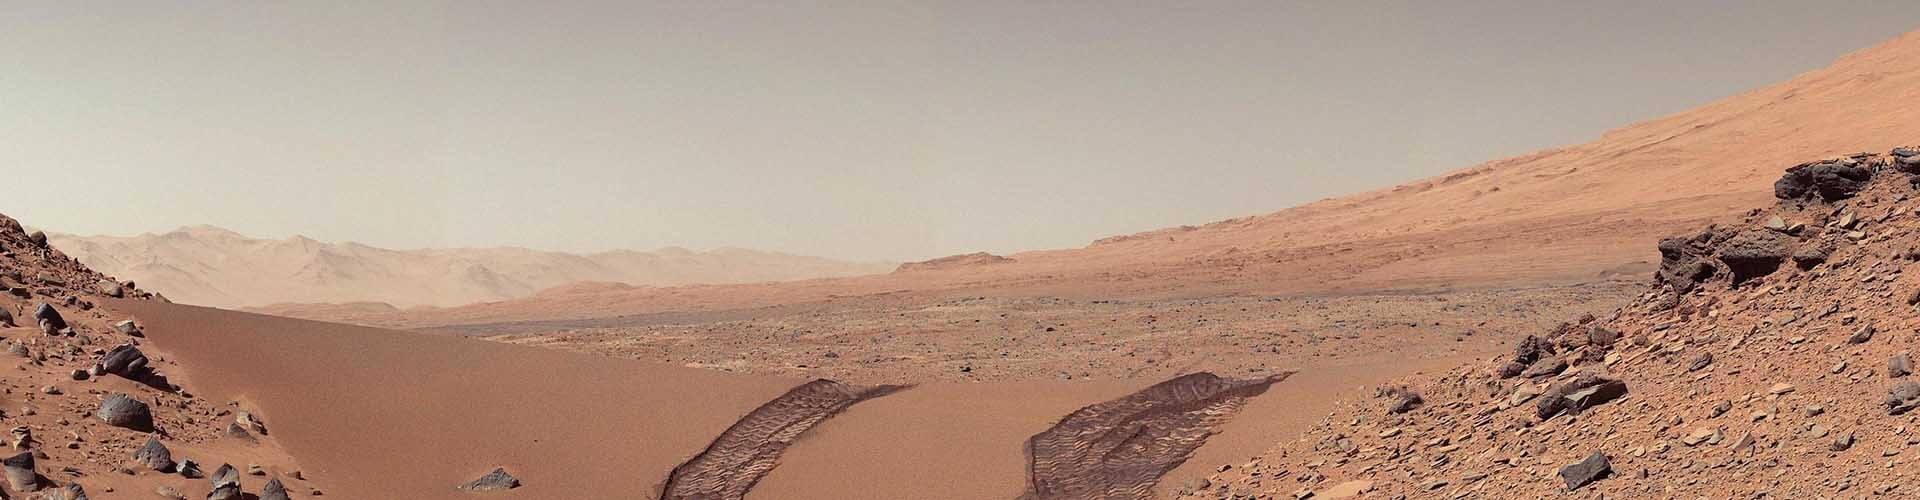 red and rocky mars landscape